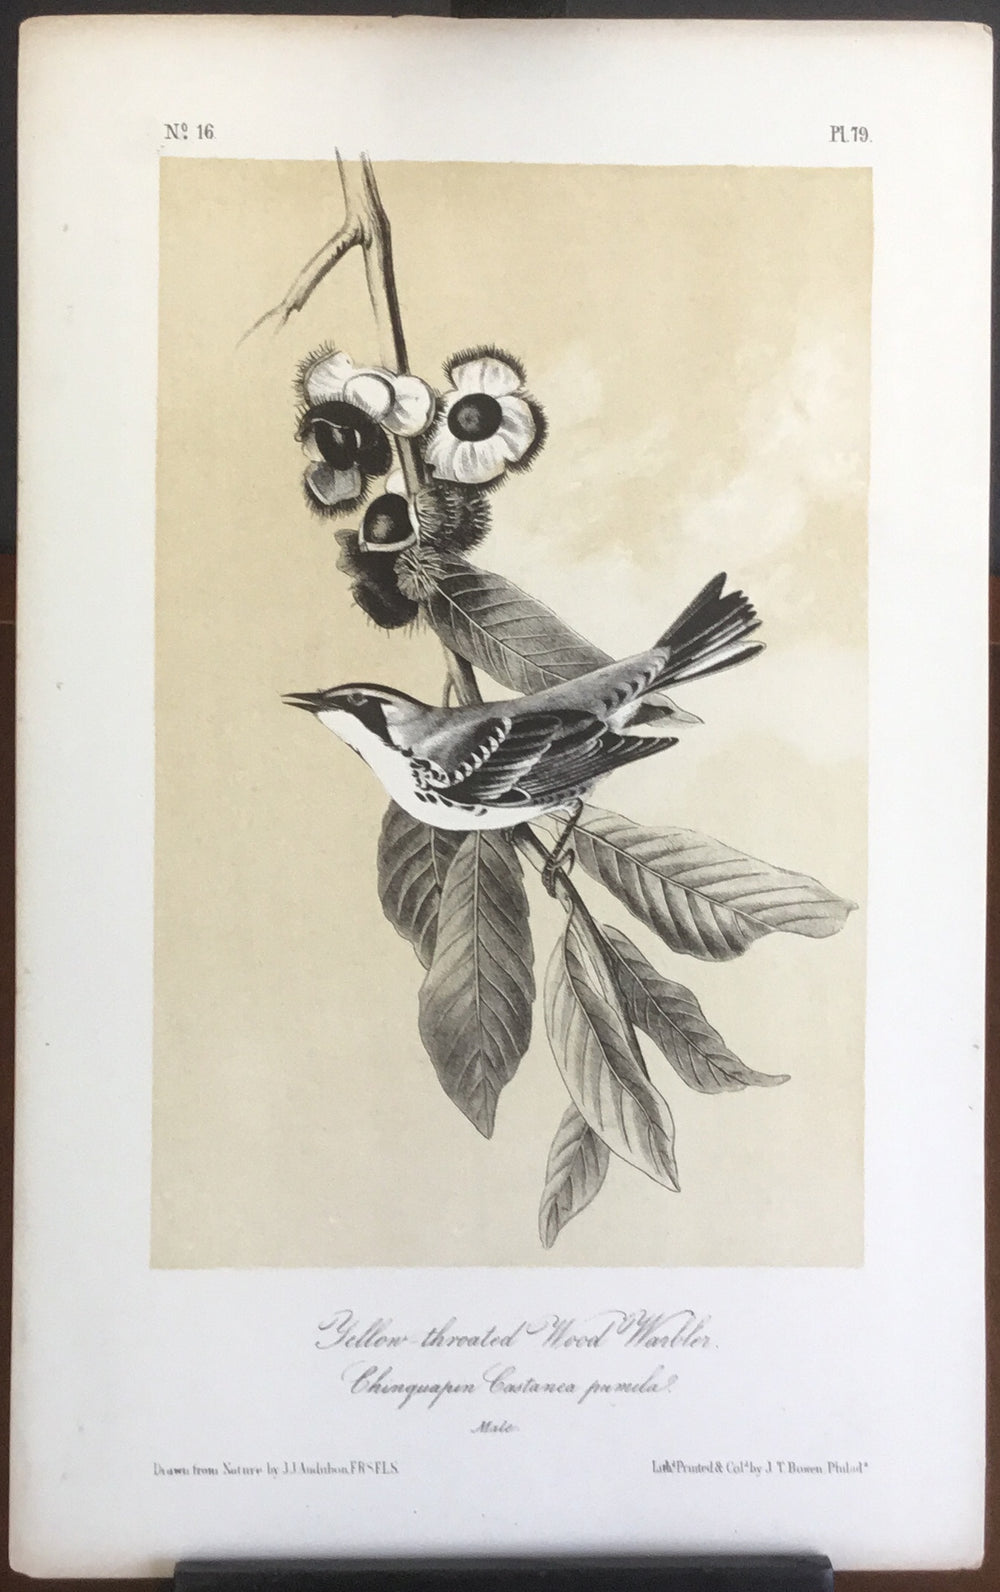 Audubon Octavo Yellow-throated Wood Warbler, plate 79, uncolored test sheet, 7 x 11